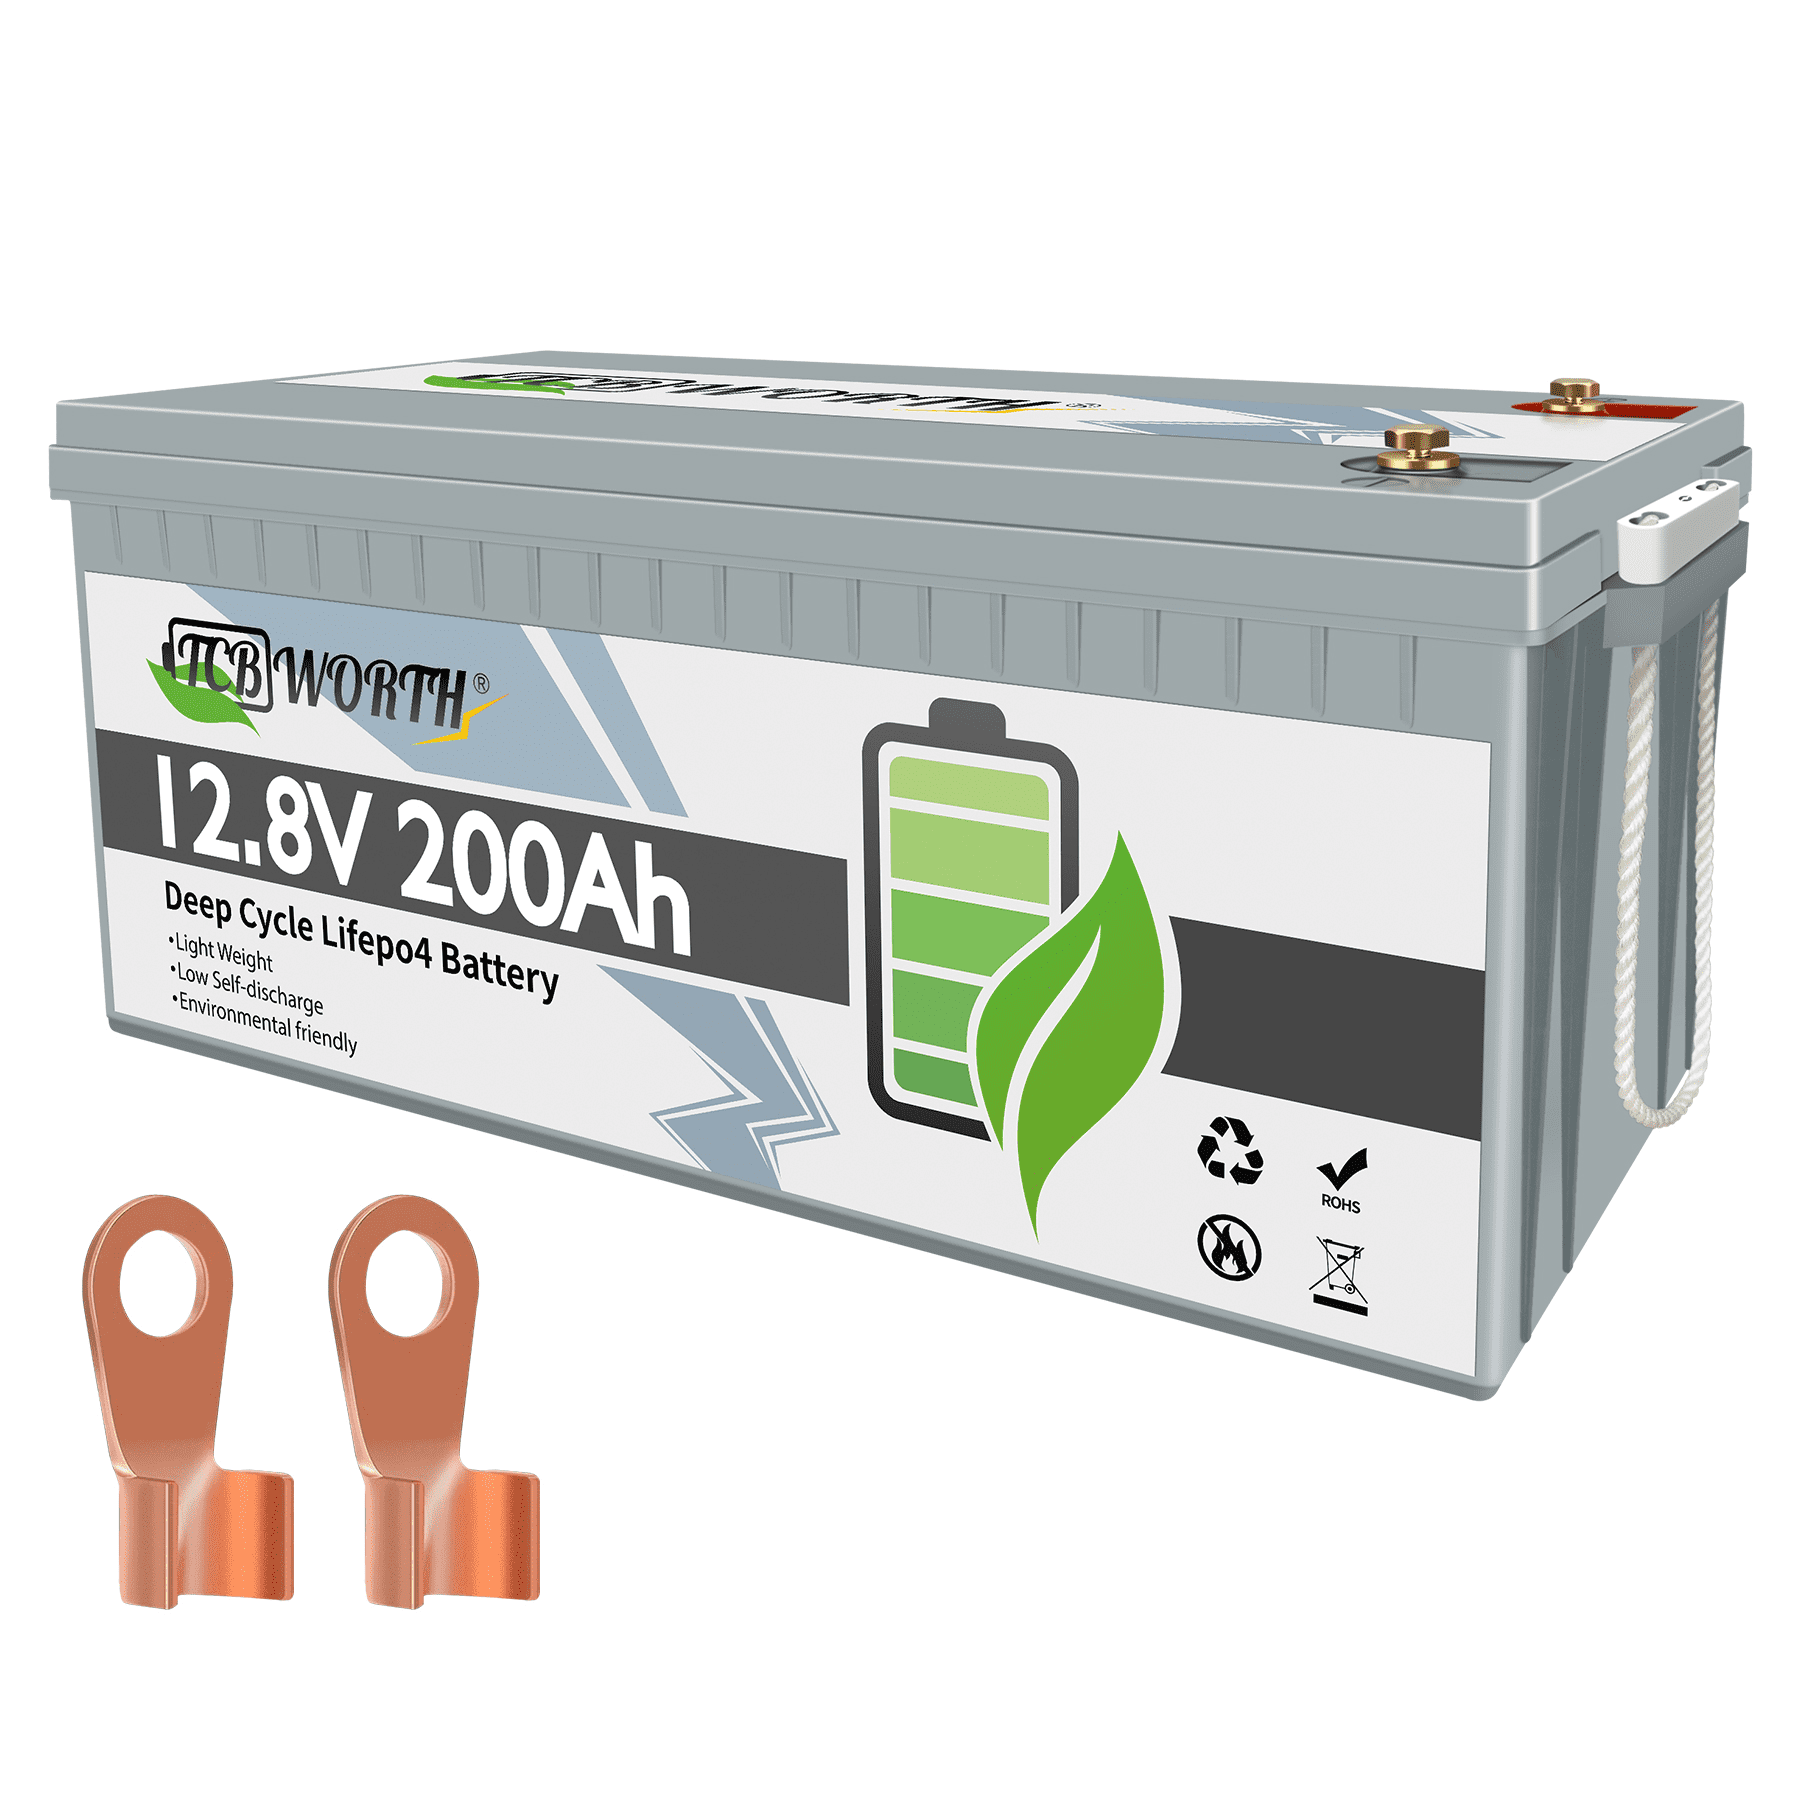 Redodo 12V 200Ah LiFePO4 Battery Lithium Battery with 100A BMS,  Rechargeable 4000-15000 Deep Cycles & 10-Year Lifetime, Perfect for RV,  Camping